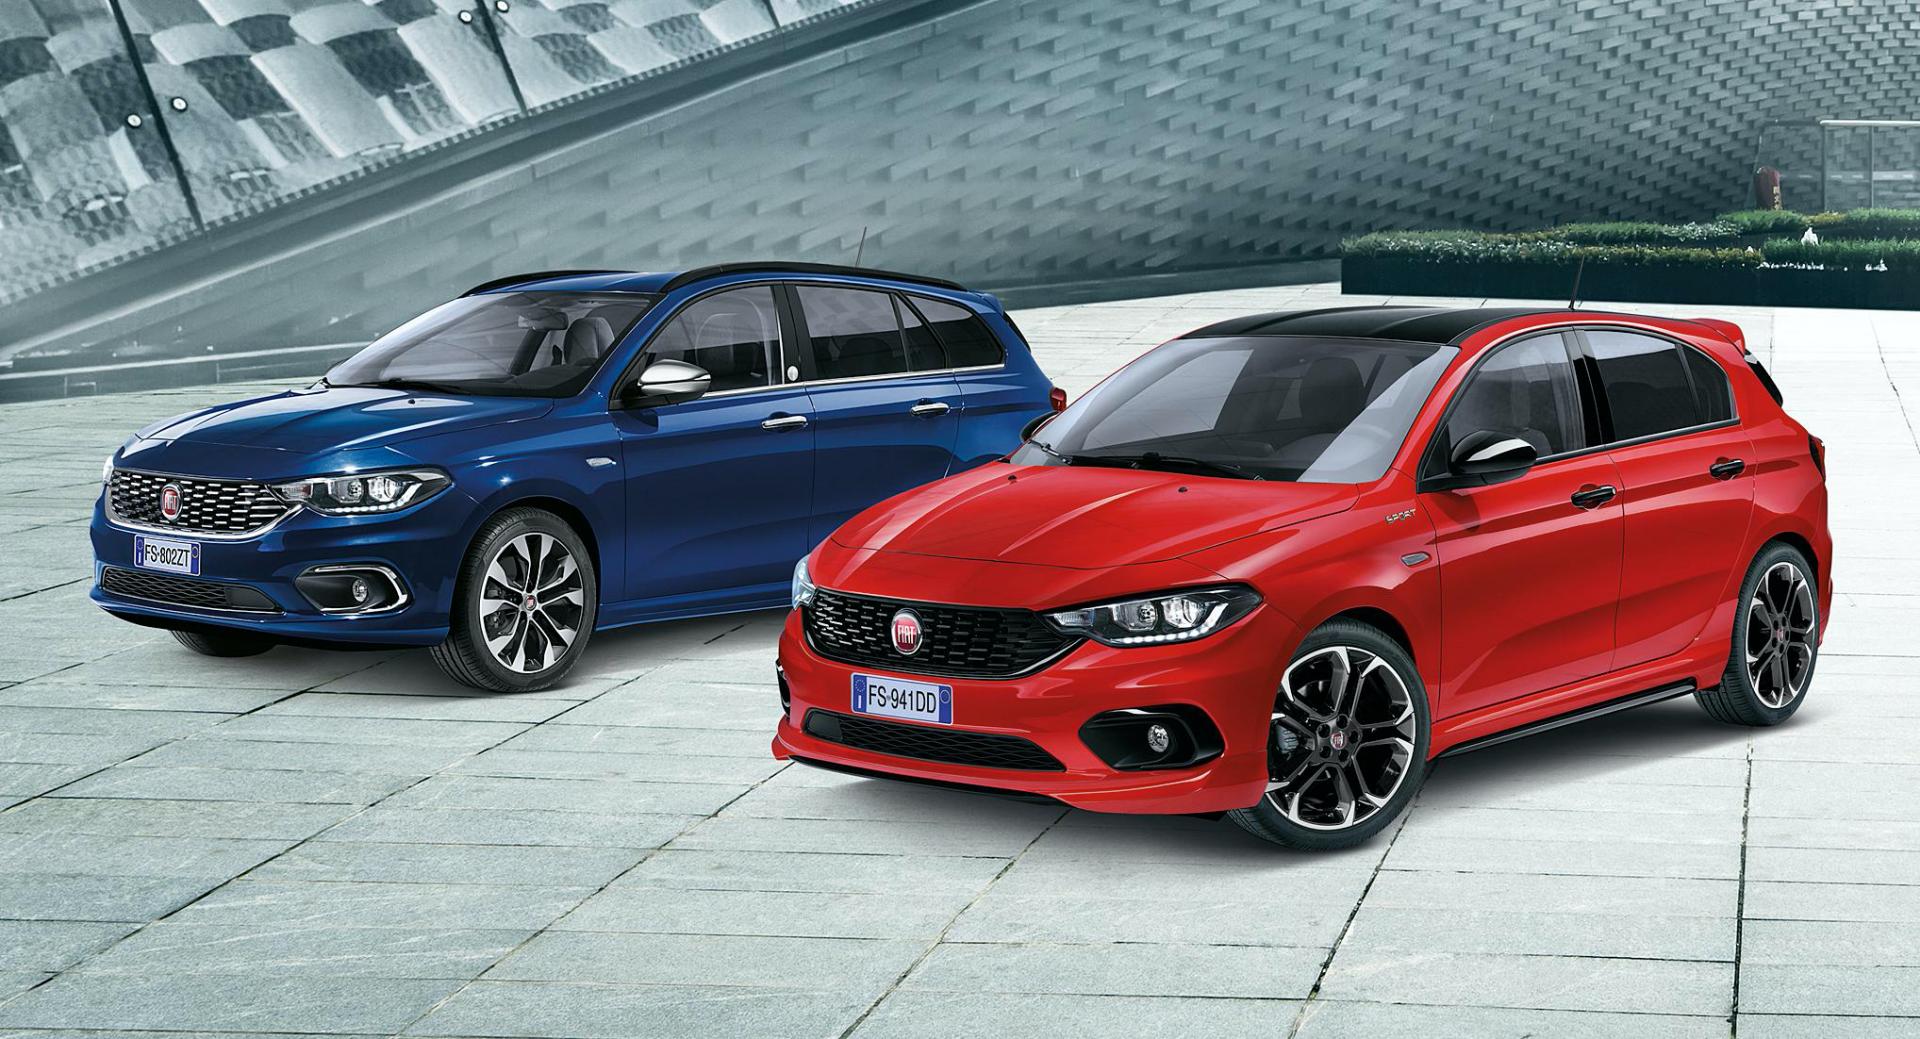 New 'More' Package Enhances 2020 Fiat Tipo Lineup's Styling, Equipment